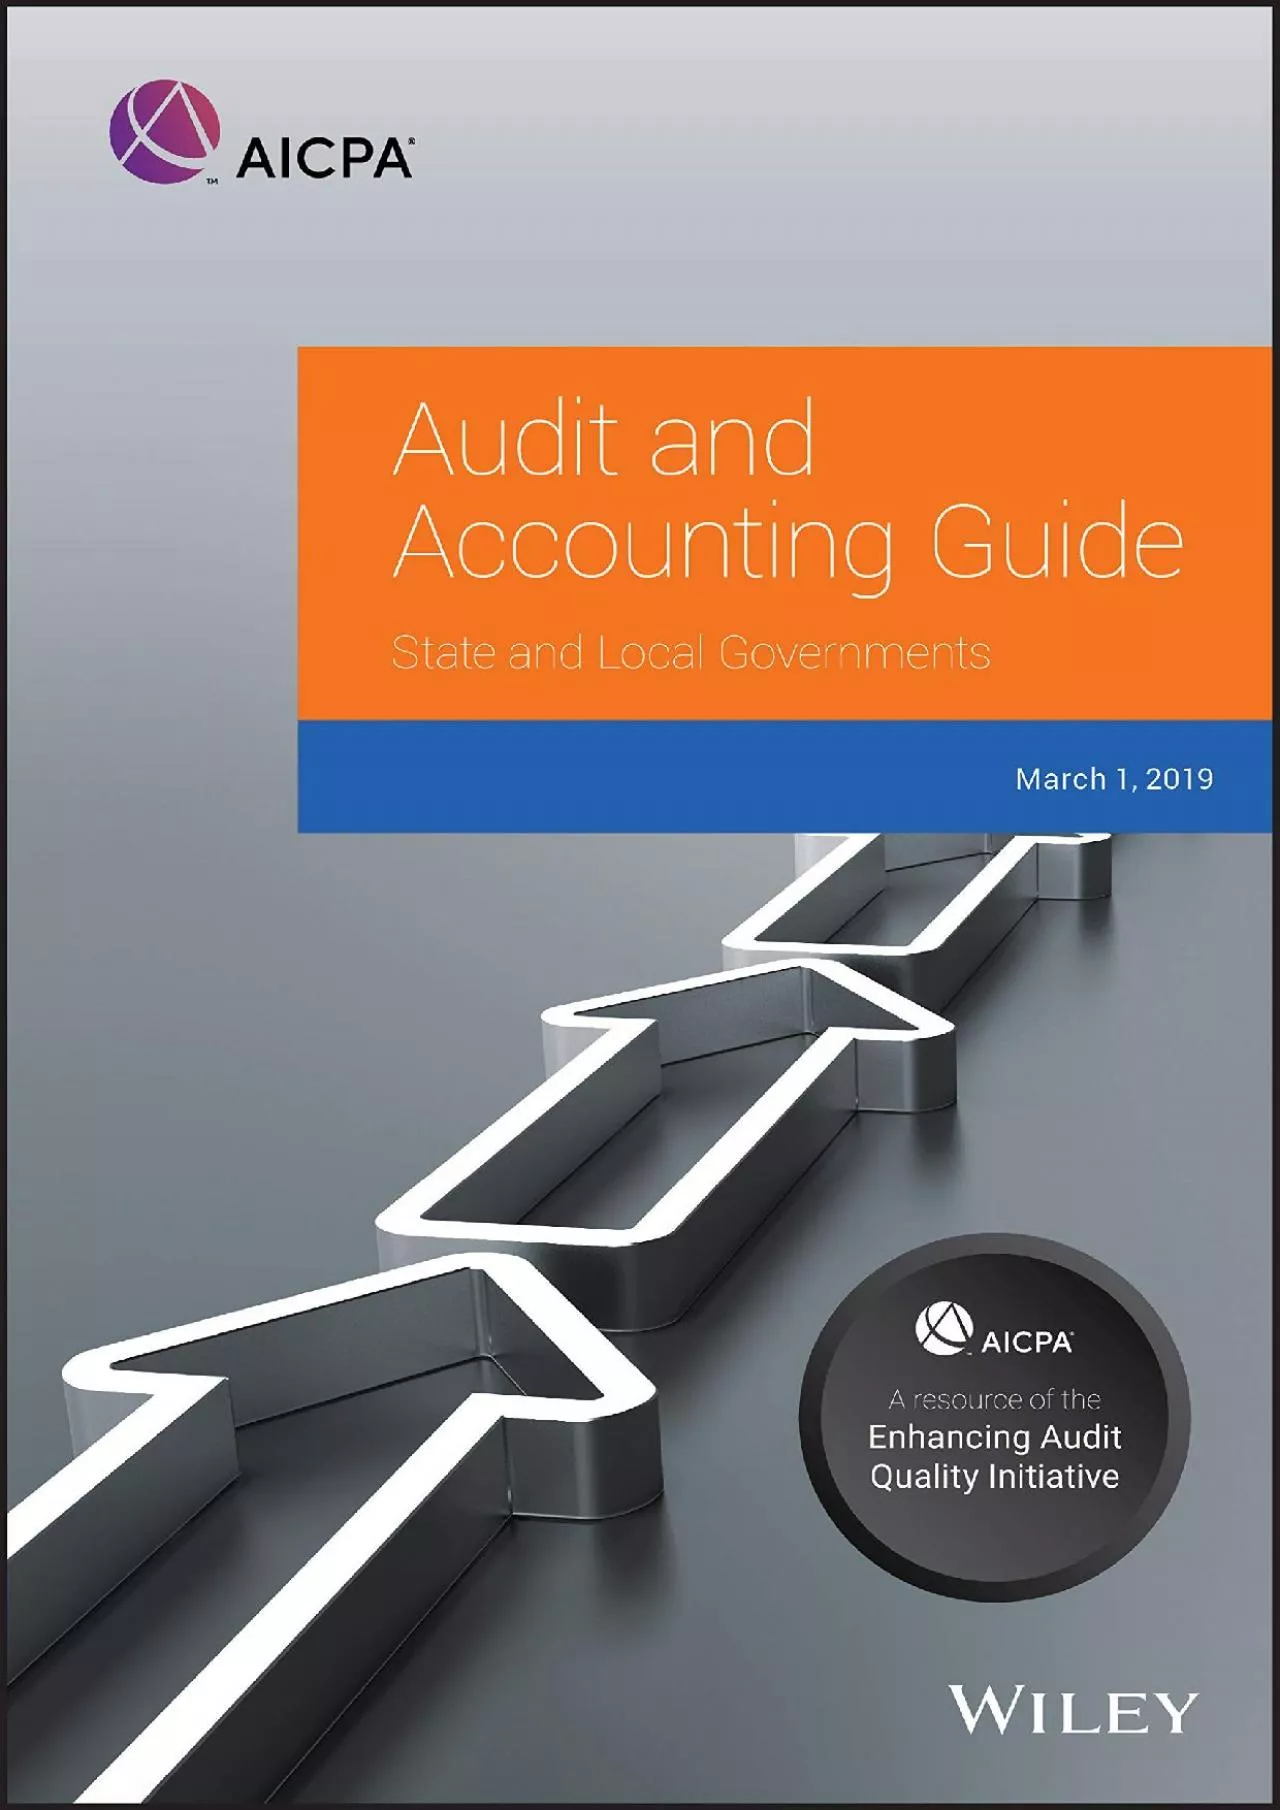 Audit and Accounting Guide: State and Local Governments 2019 (AICPA Audit and Accounting